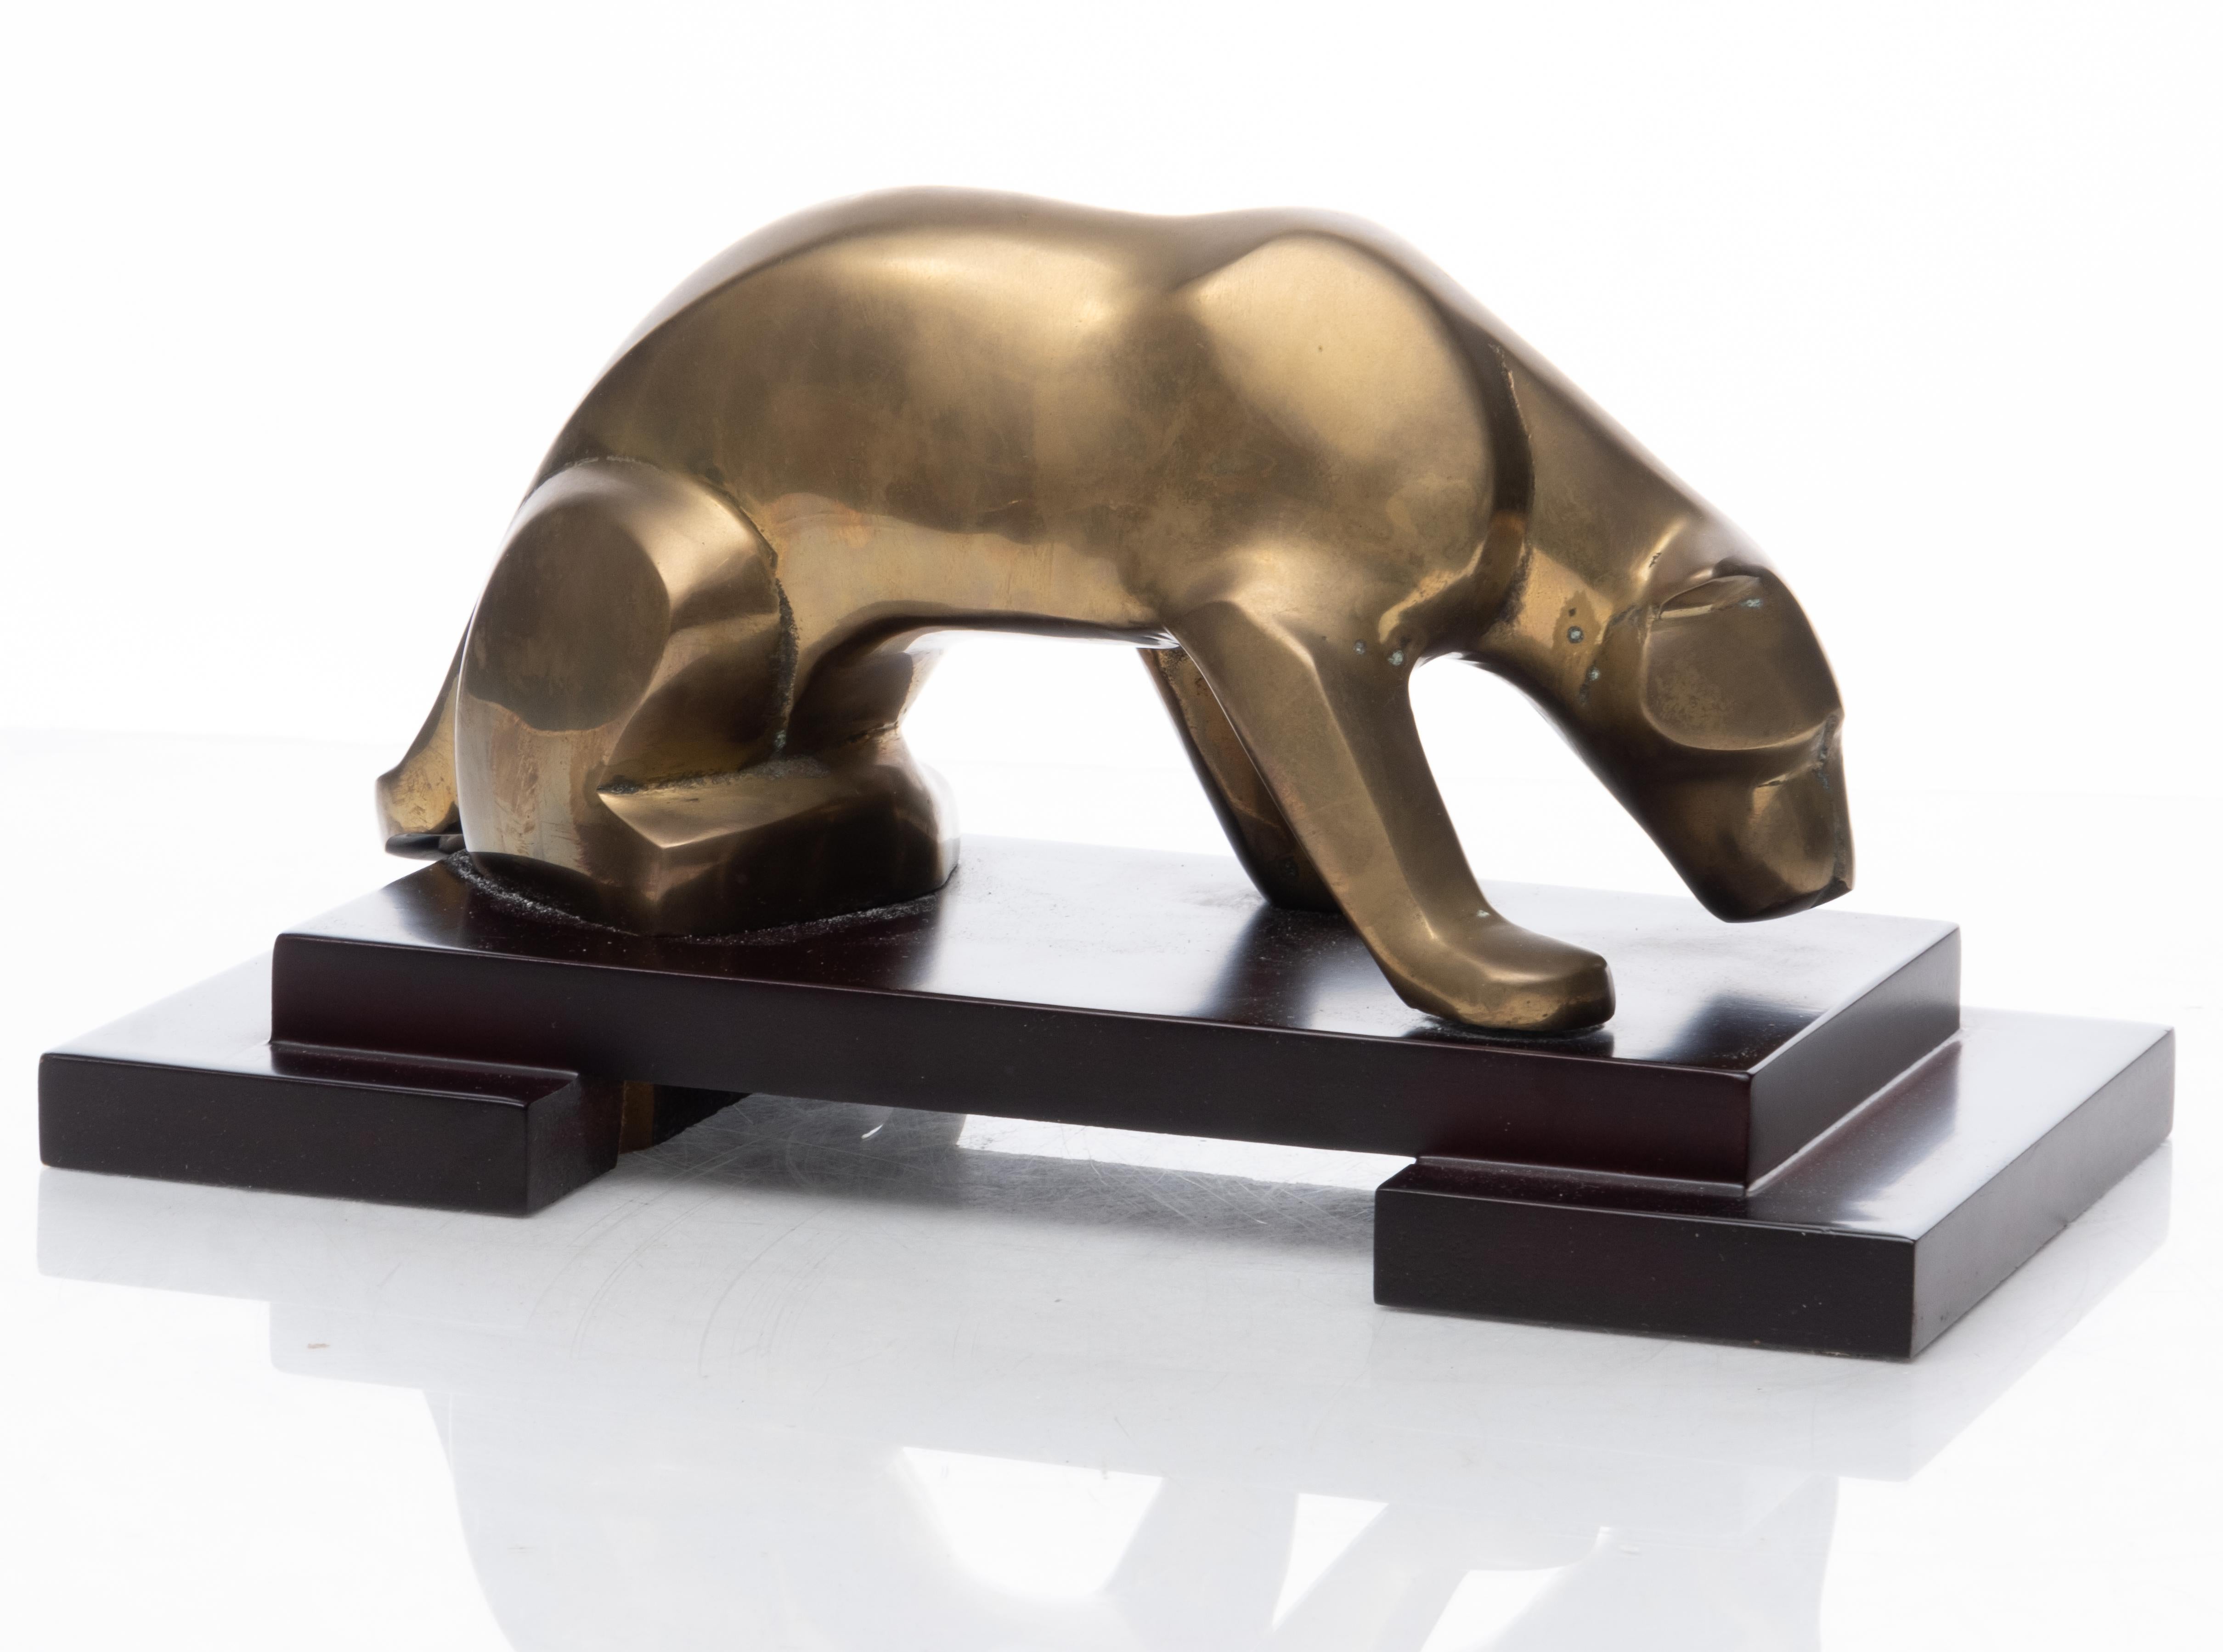 Modernist brass panther sculpture on lacquered wood stand, unsigned